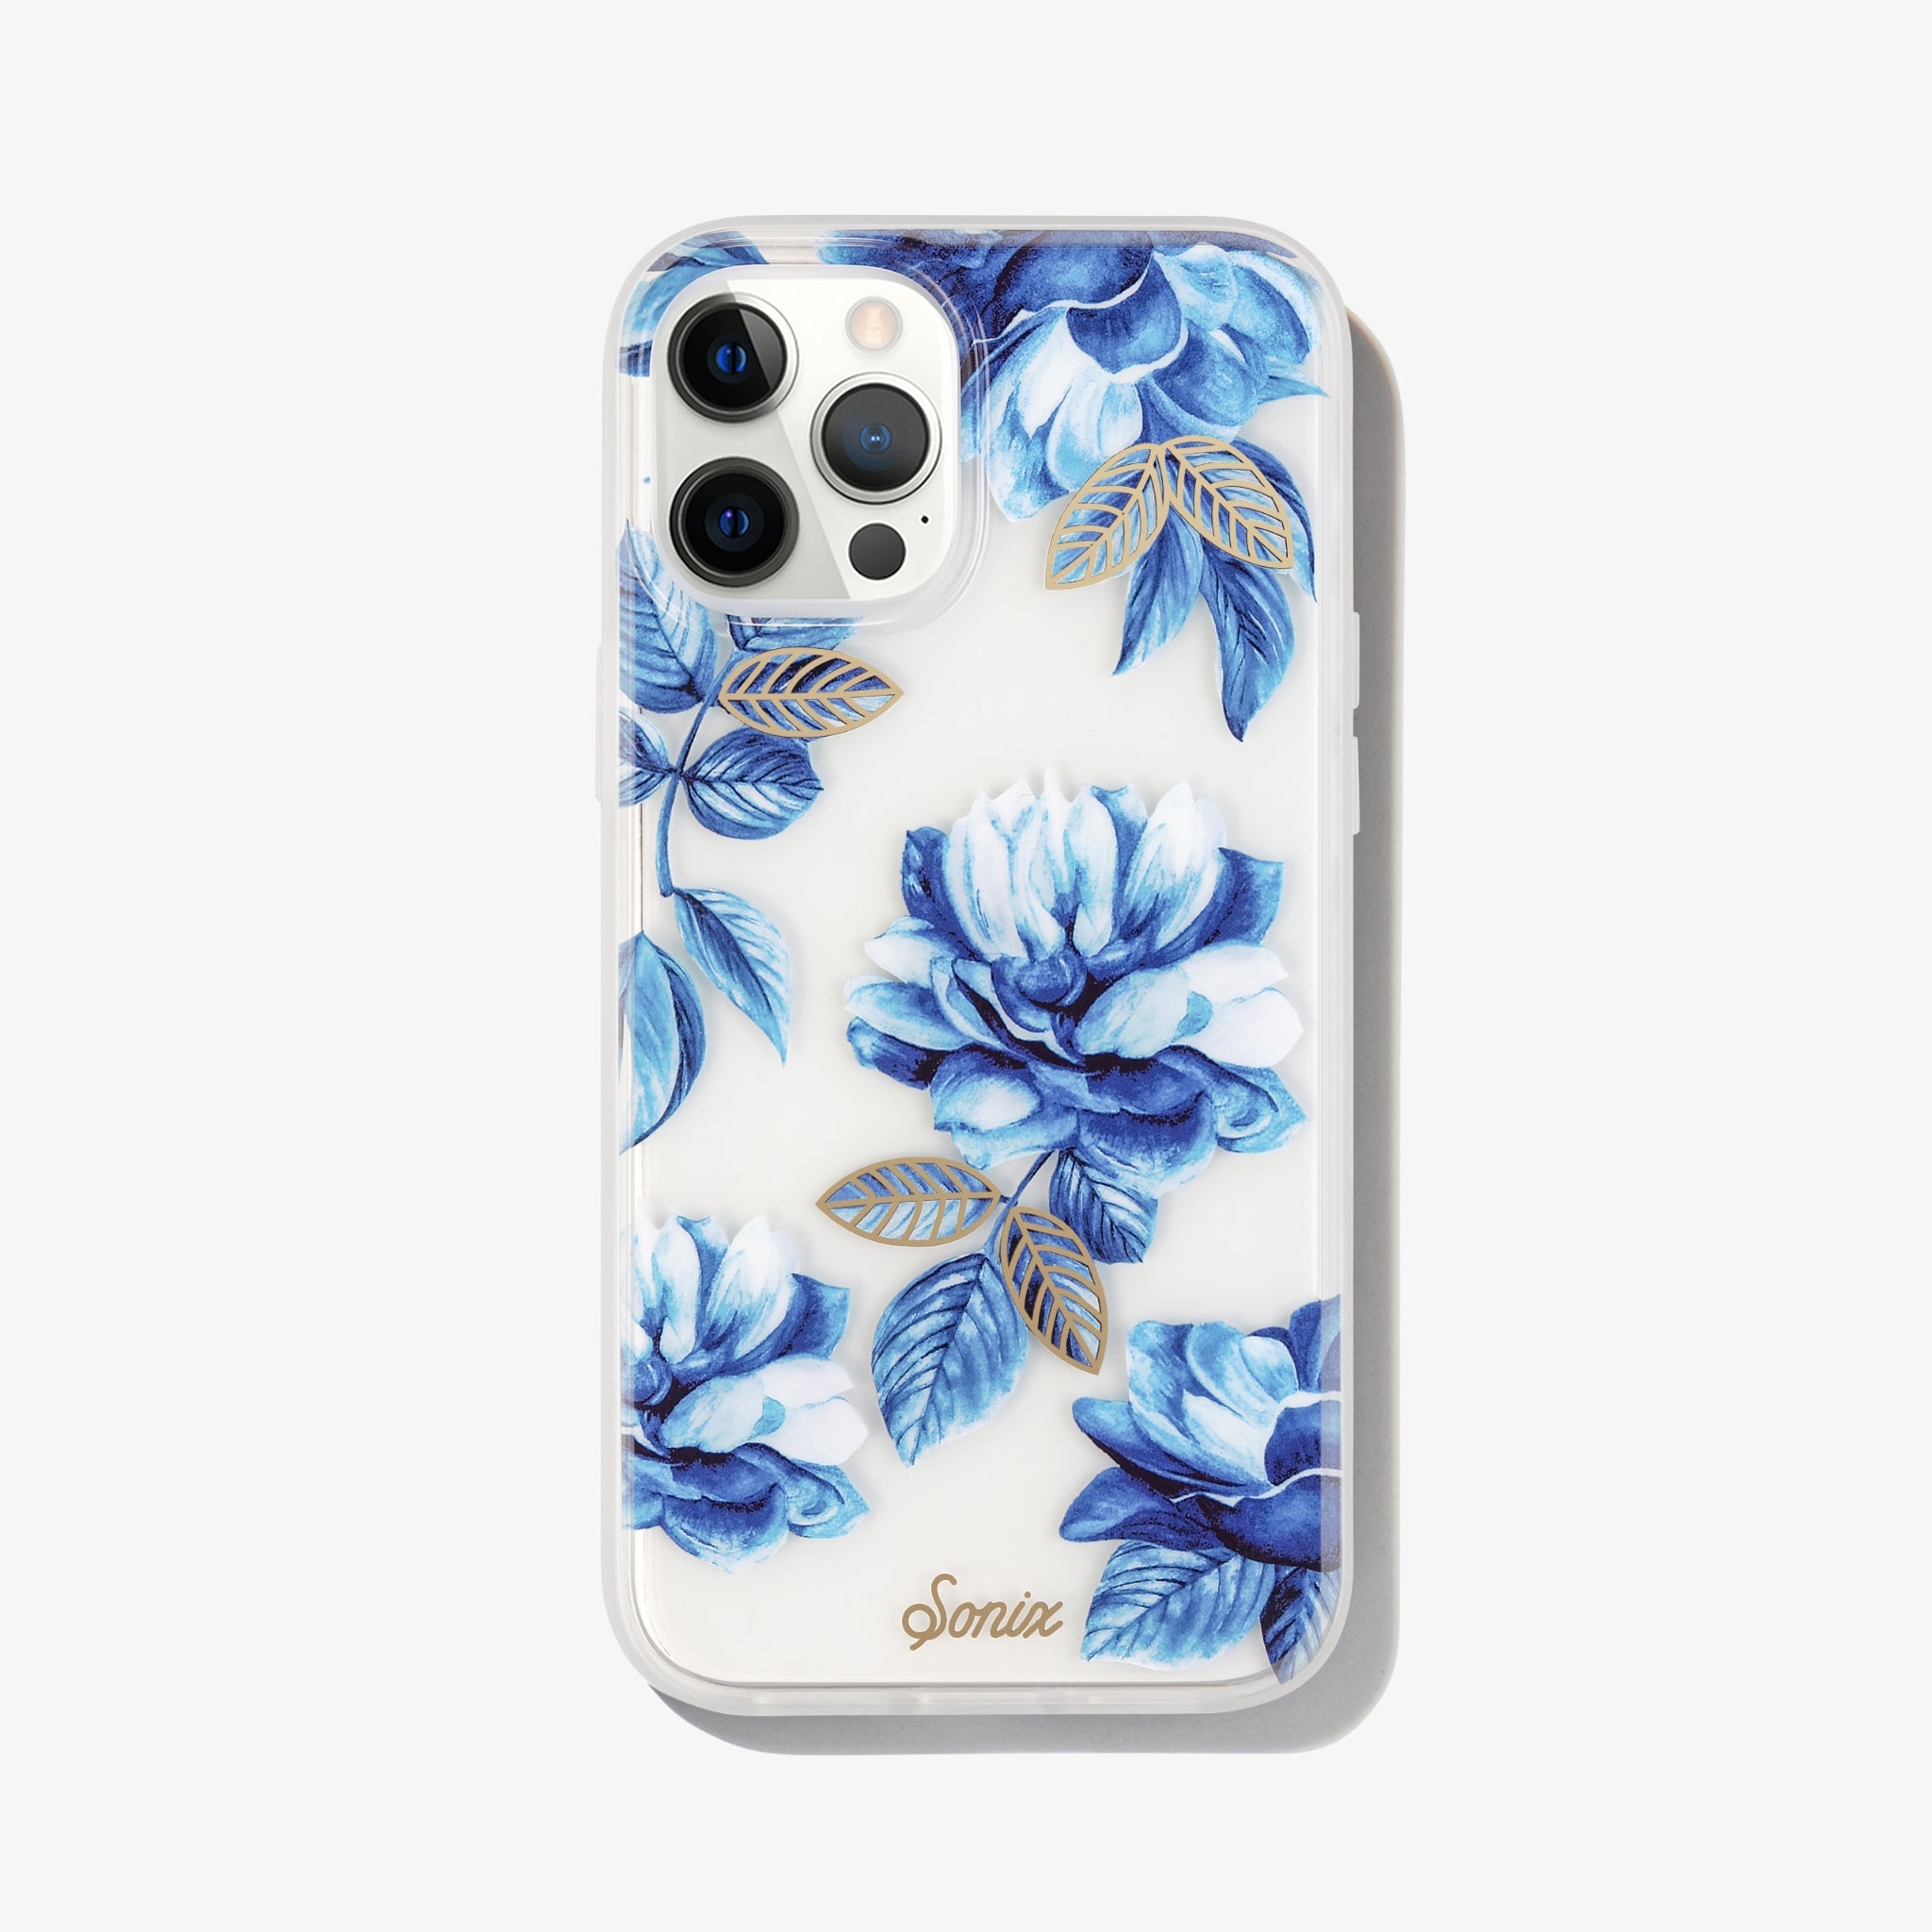 deep blue floral design with gold embroidered leaves shown on an iphone 12 pro max